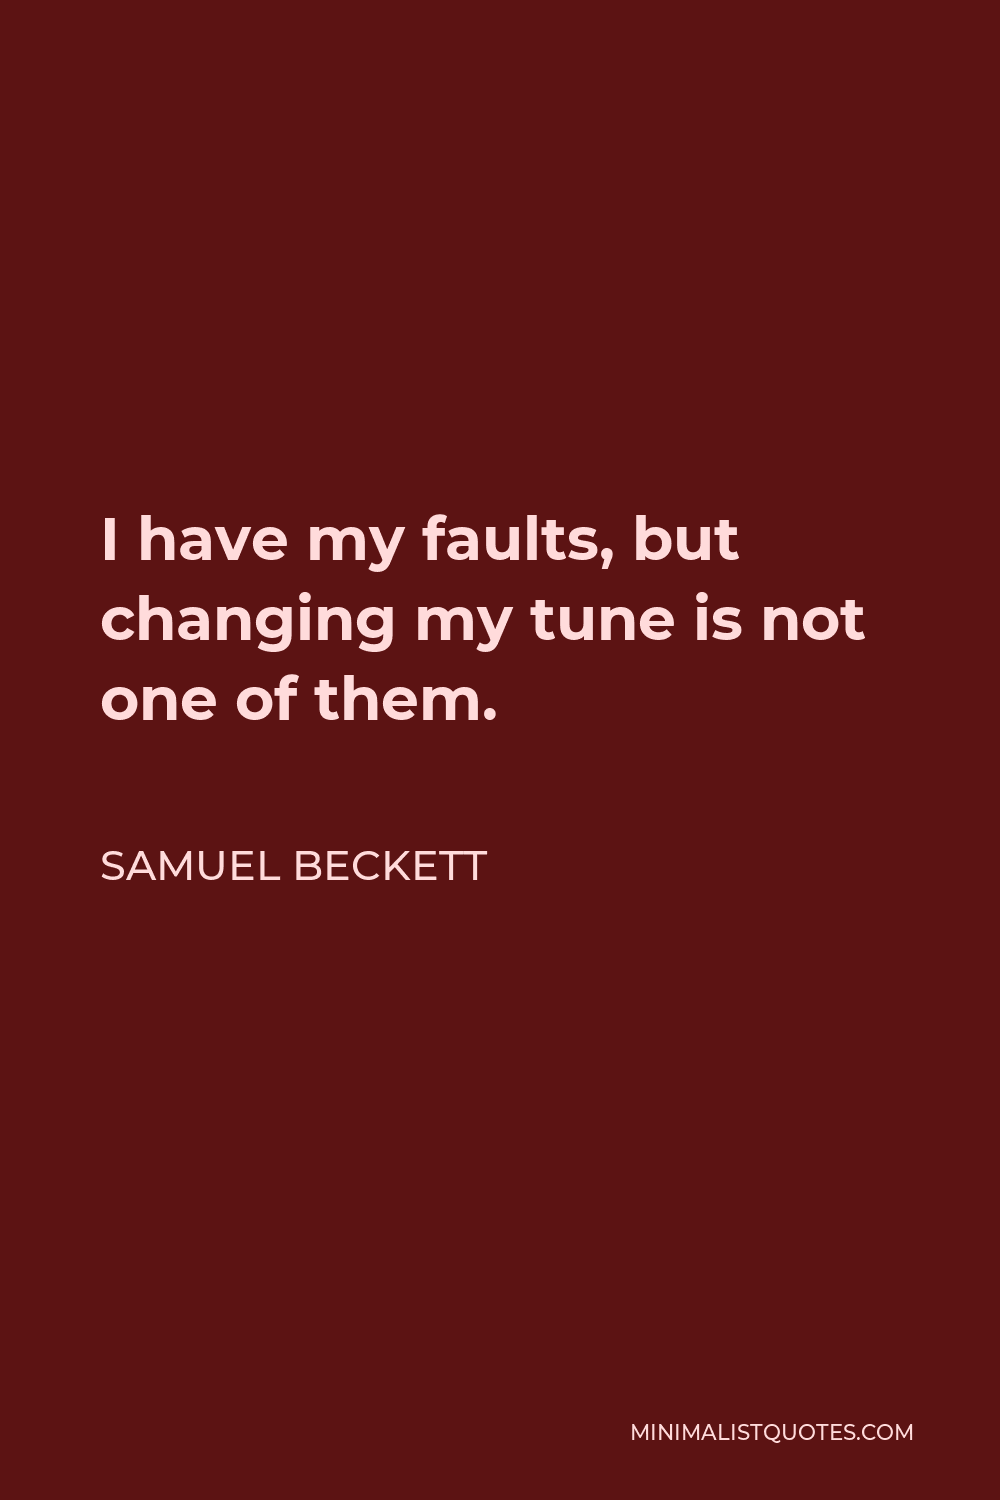 Samuel Beckett Quote - I have my faults, but changing my tune is not one of them.